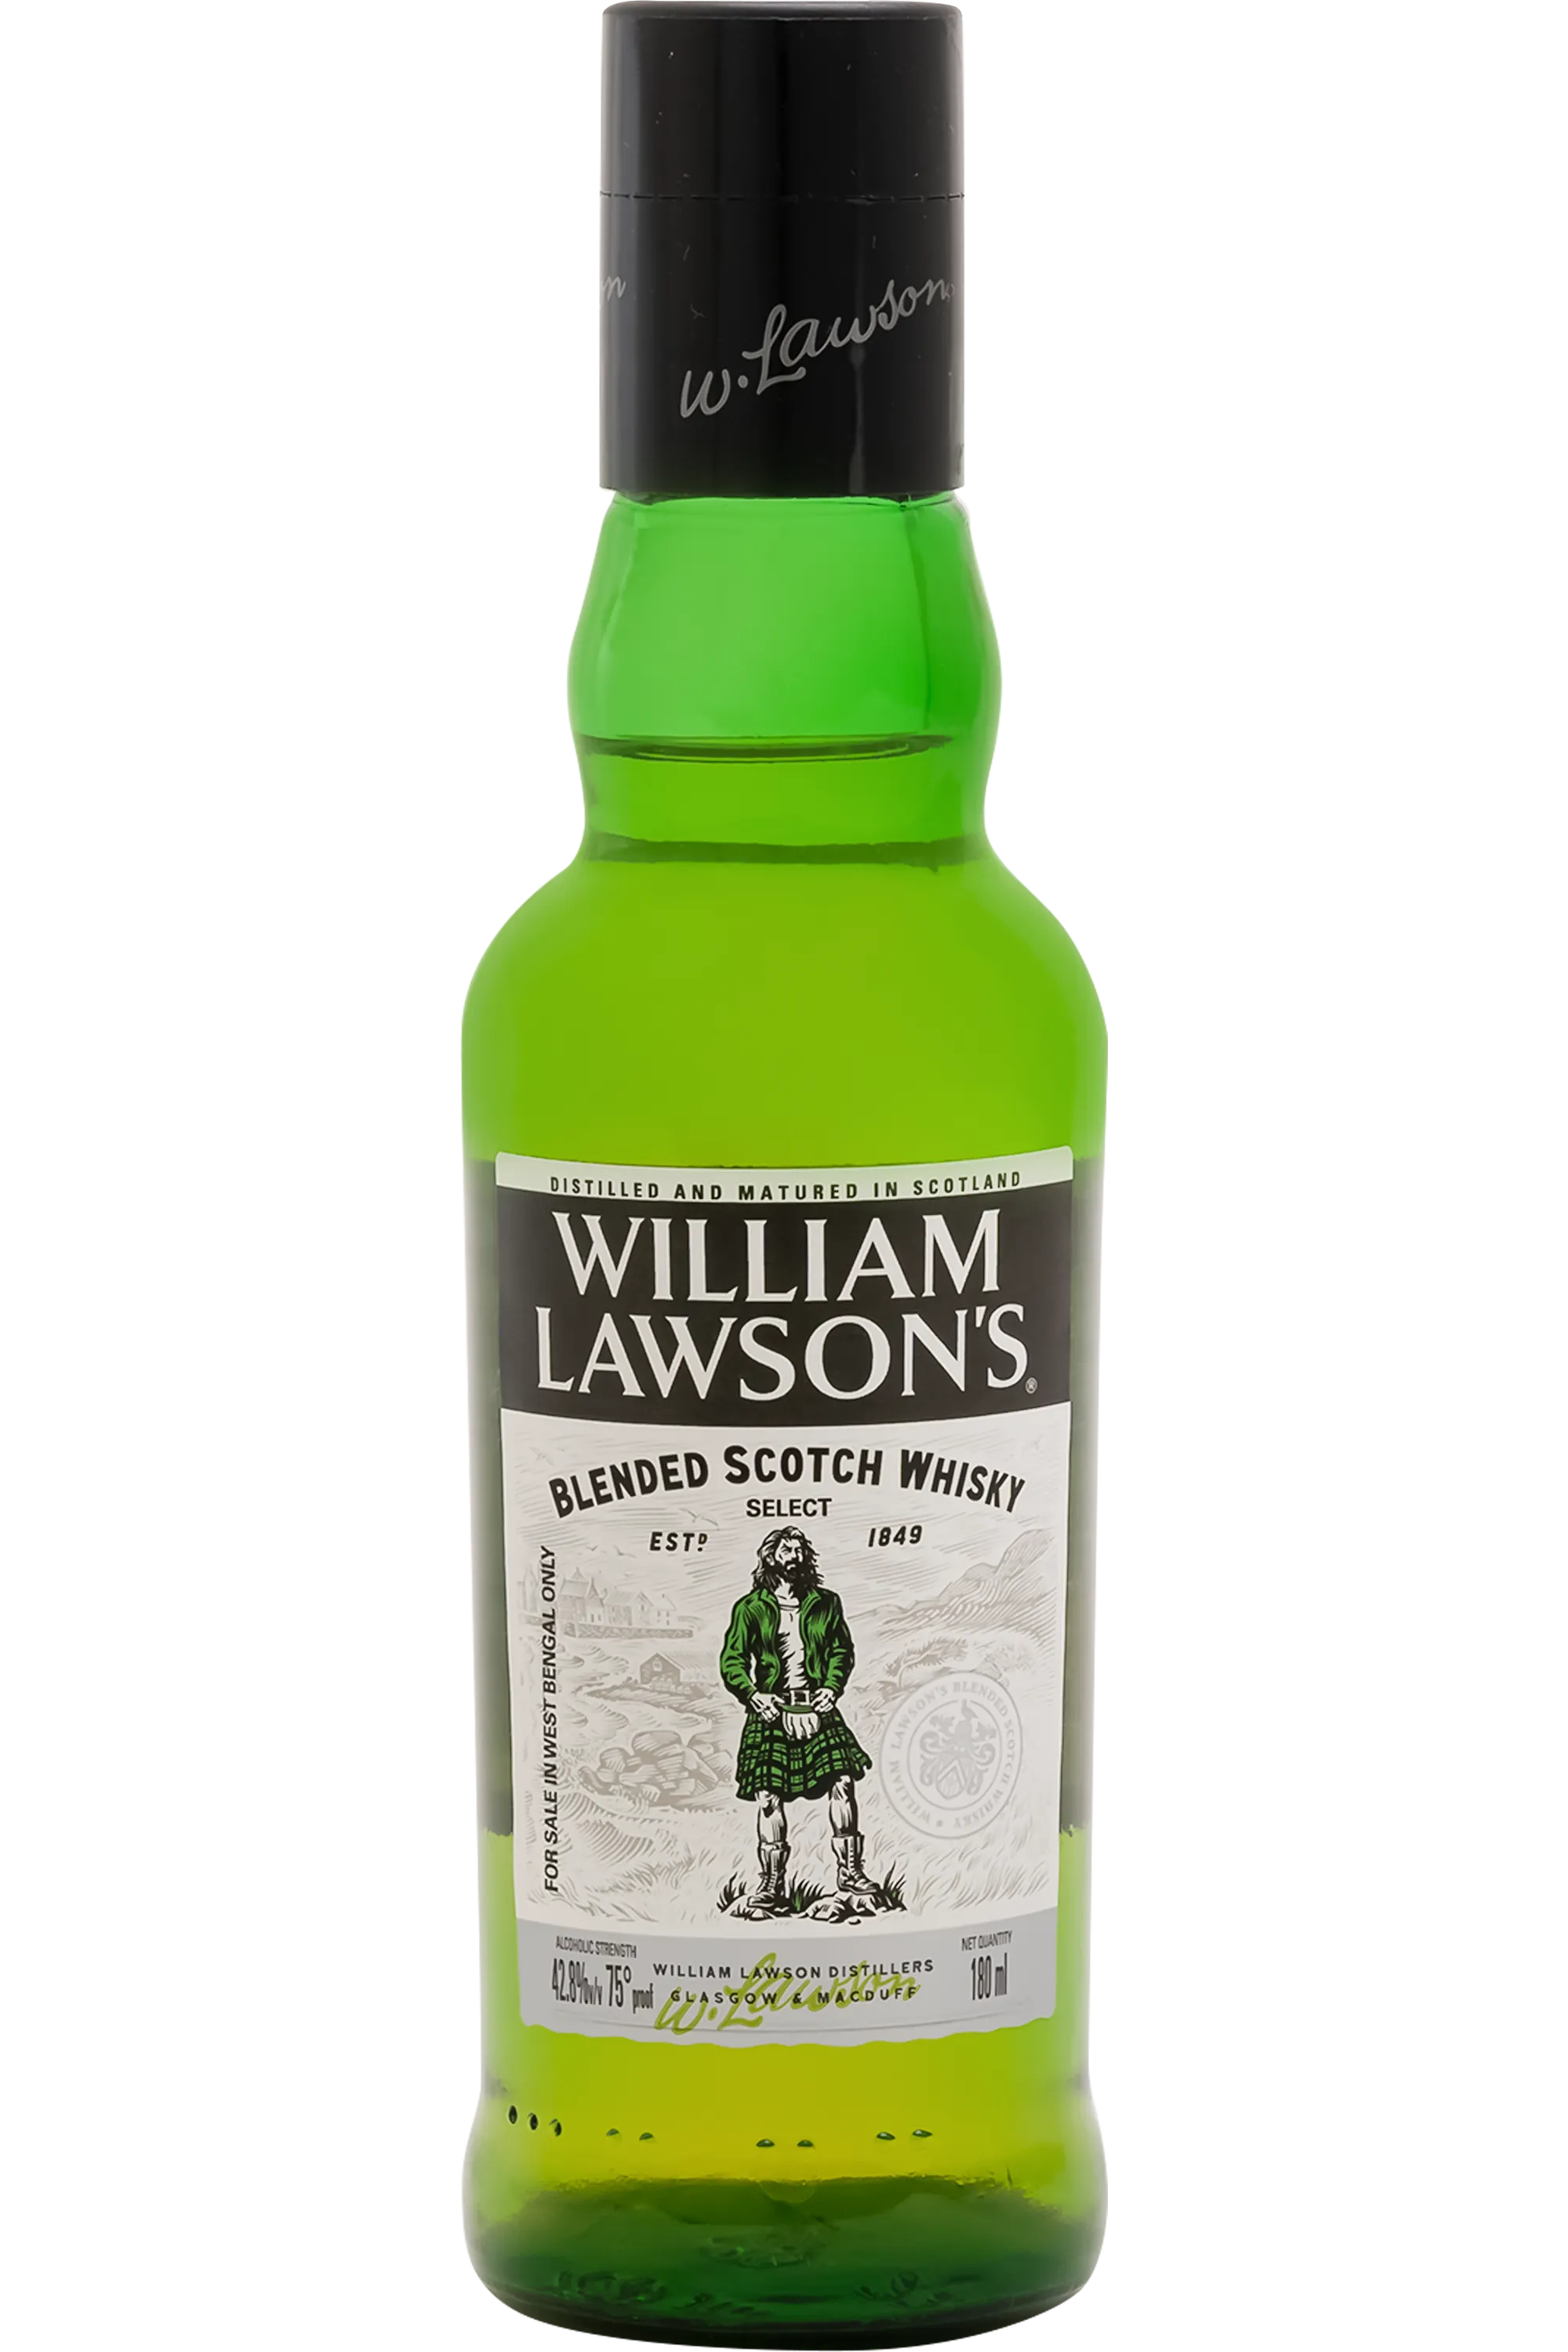 Buy William Lawson's Blended Scotch Whisky Available in 180ml